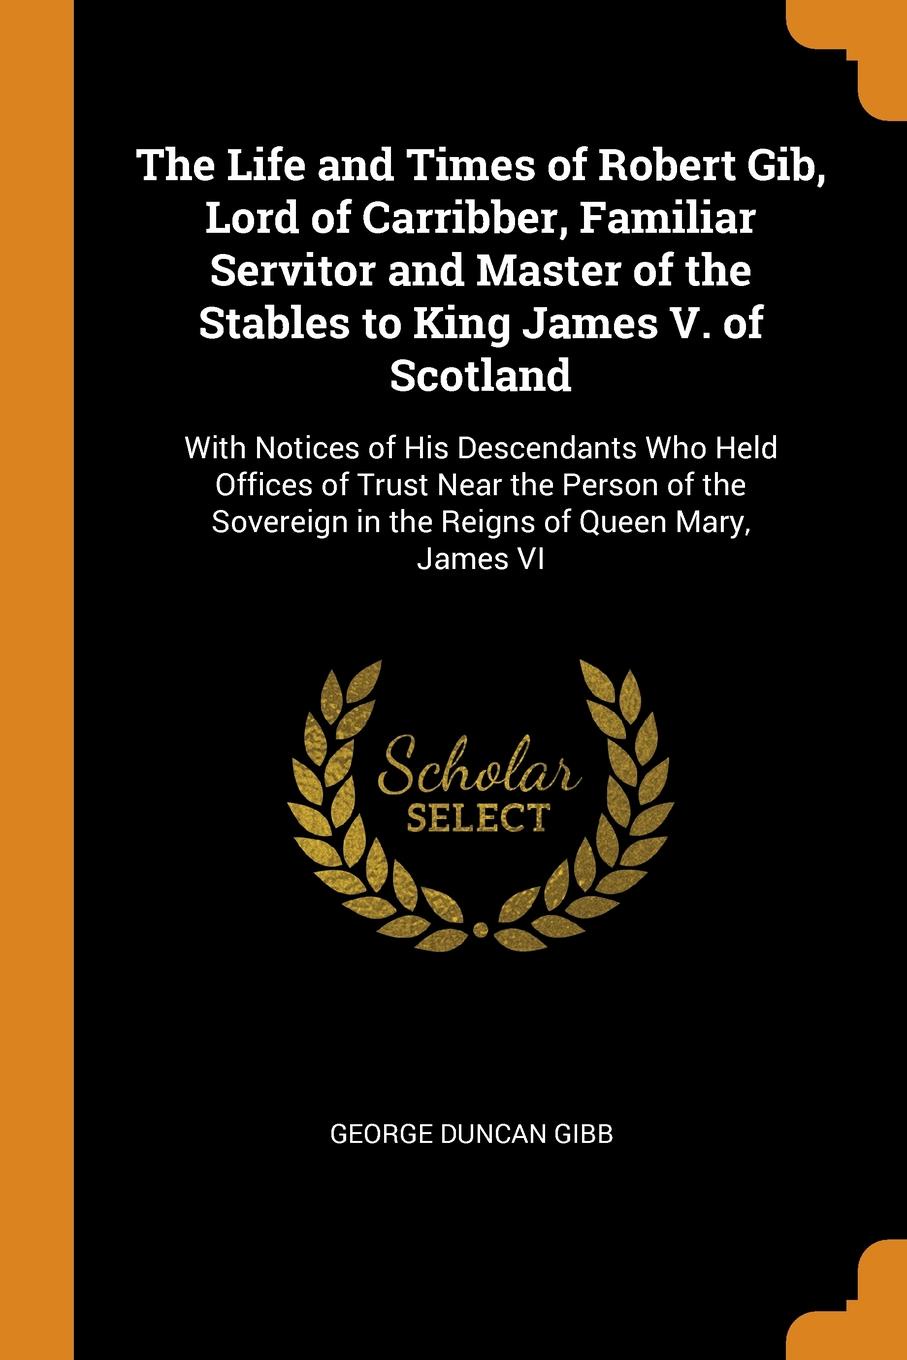 The Life and Times of Robert Gib, Lord of Carribber, Familiar Servitor and Master of the Stables to King James V. of Scotland. With Notices of His Descendants Who Held Offices of Trust Near the Person of the Sovereign in the Reigns of Queen Mary, ...